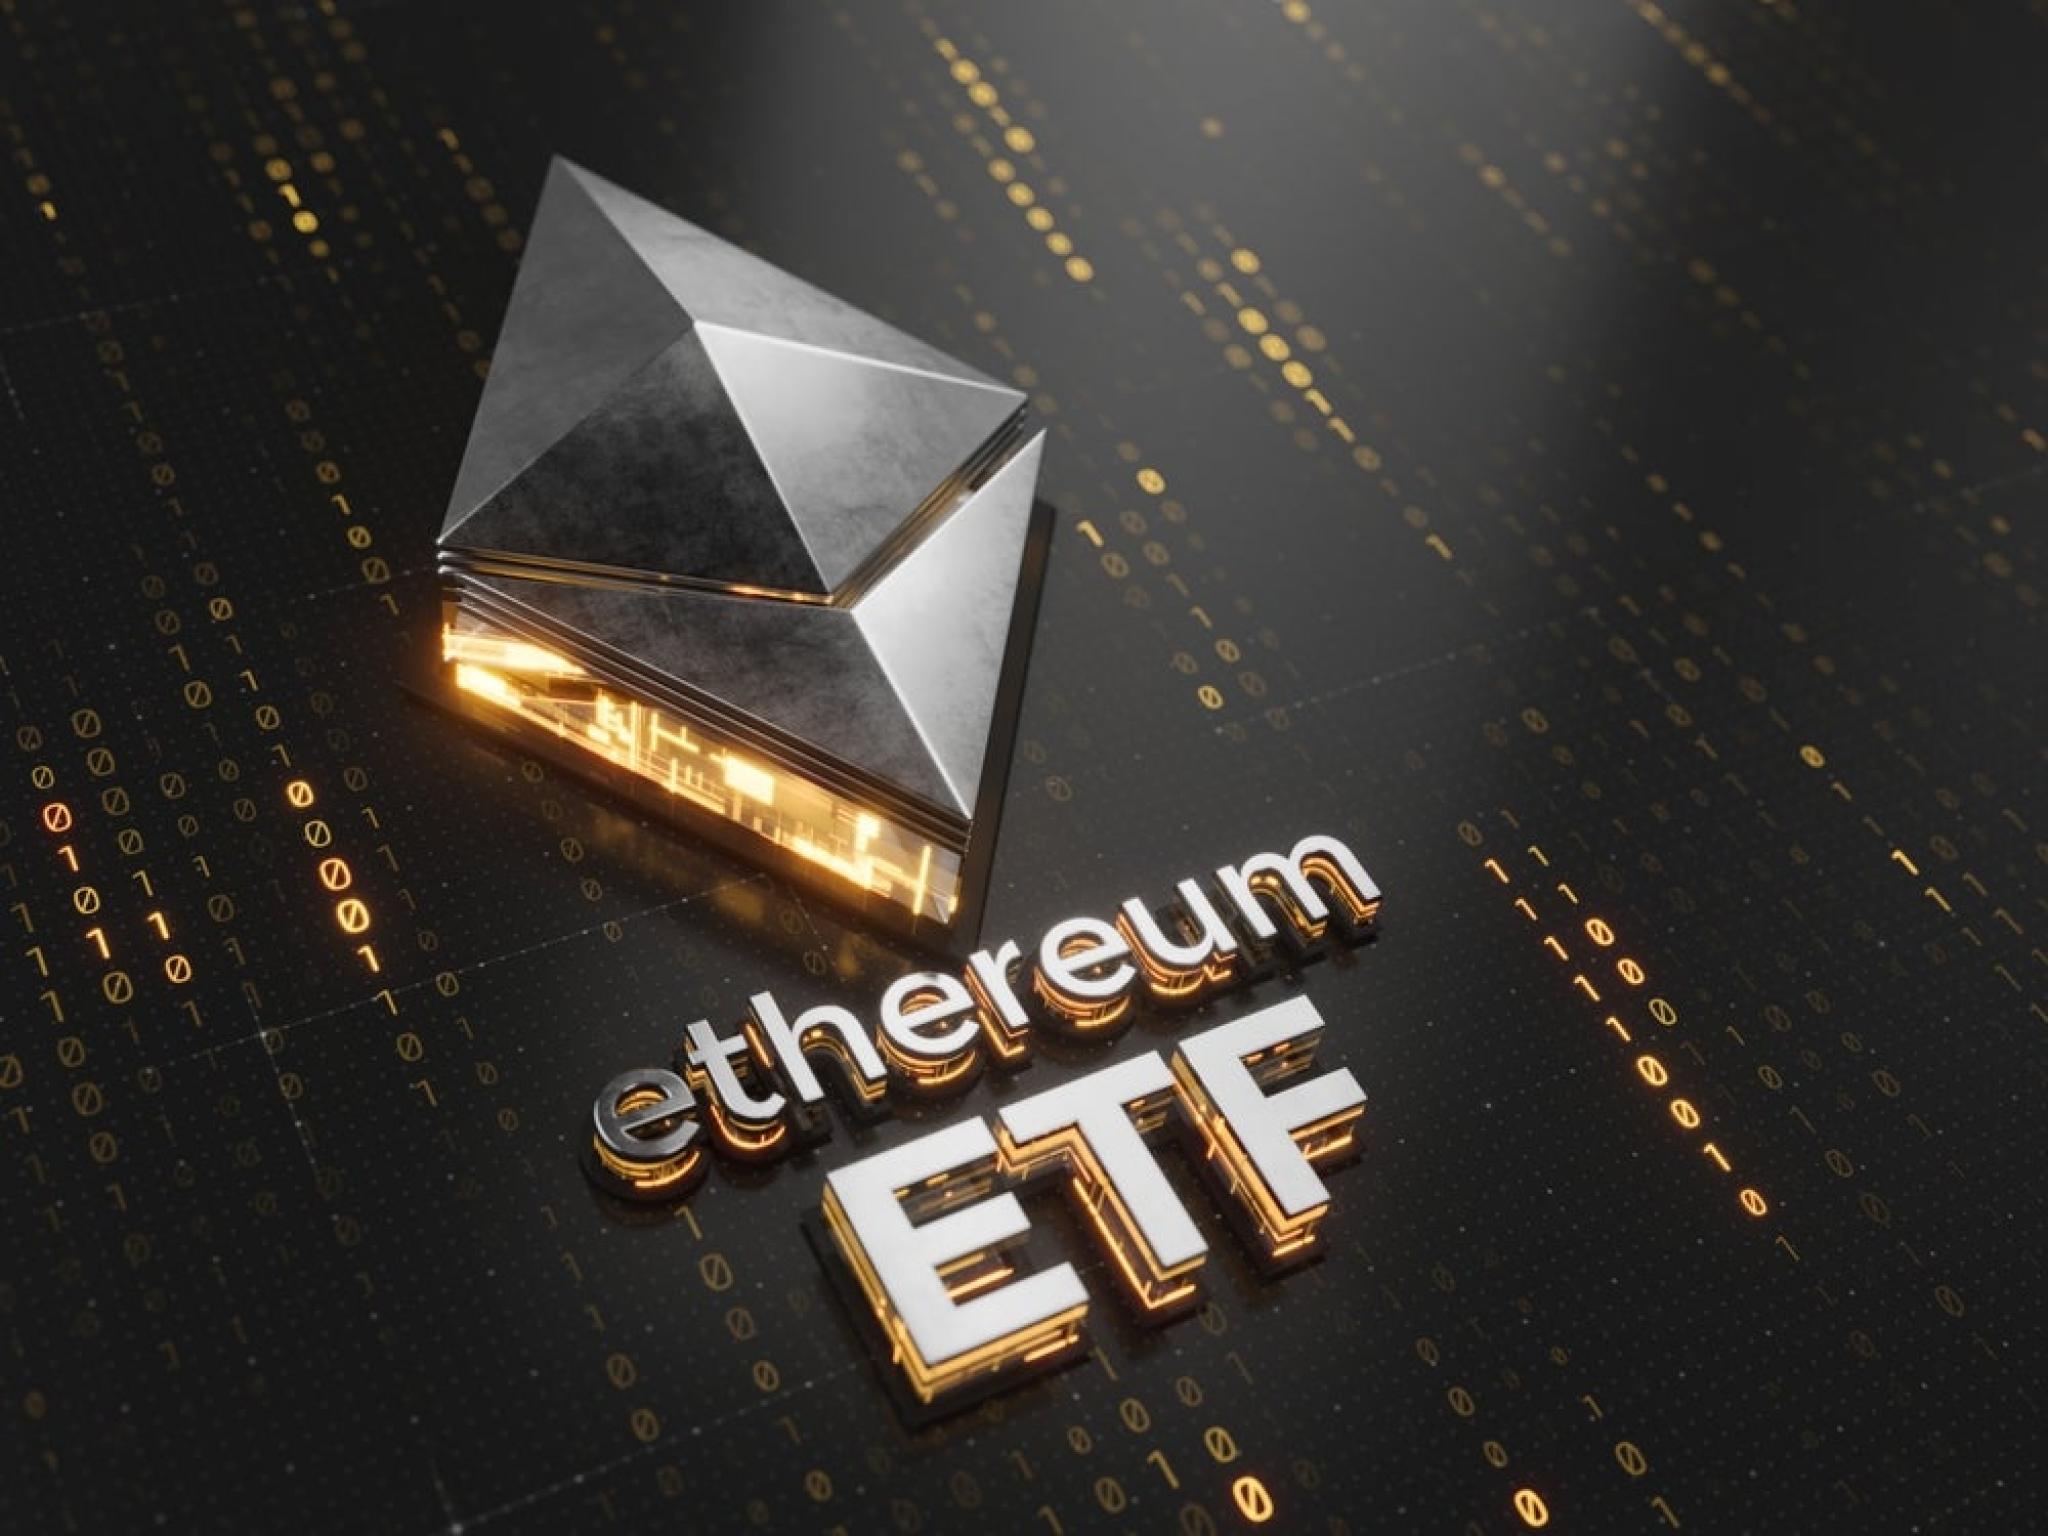  with-ethereum-etfs-approved-why-is-eth-not-going-up 